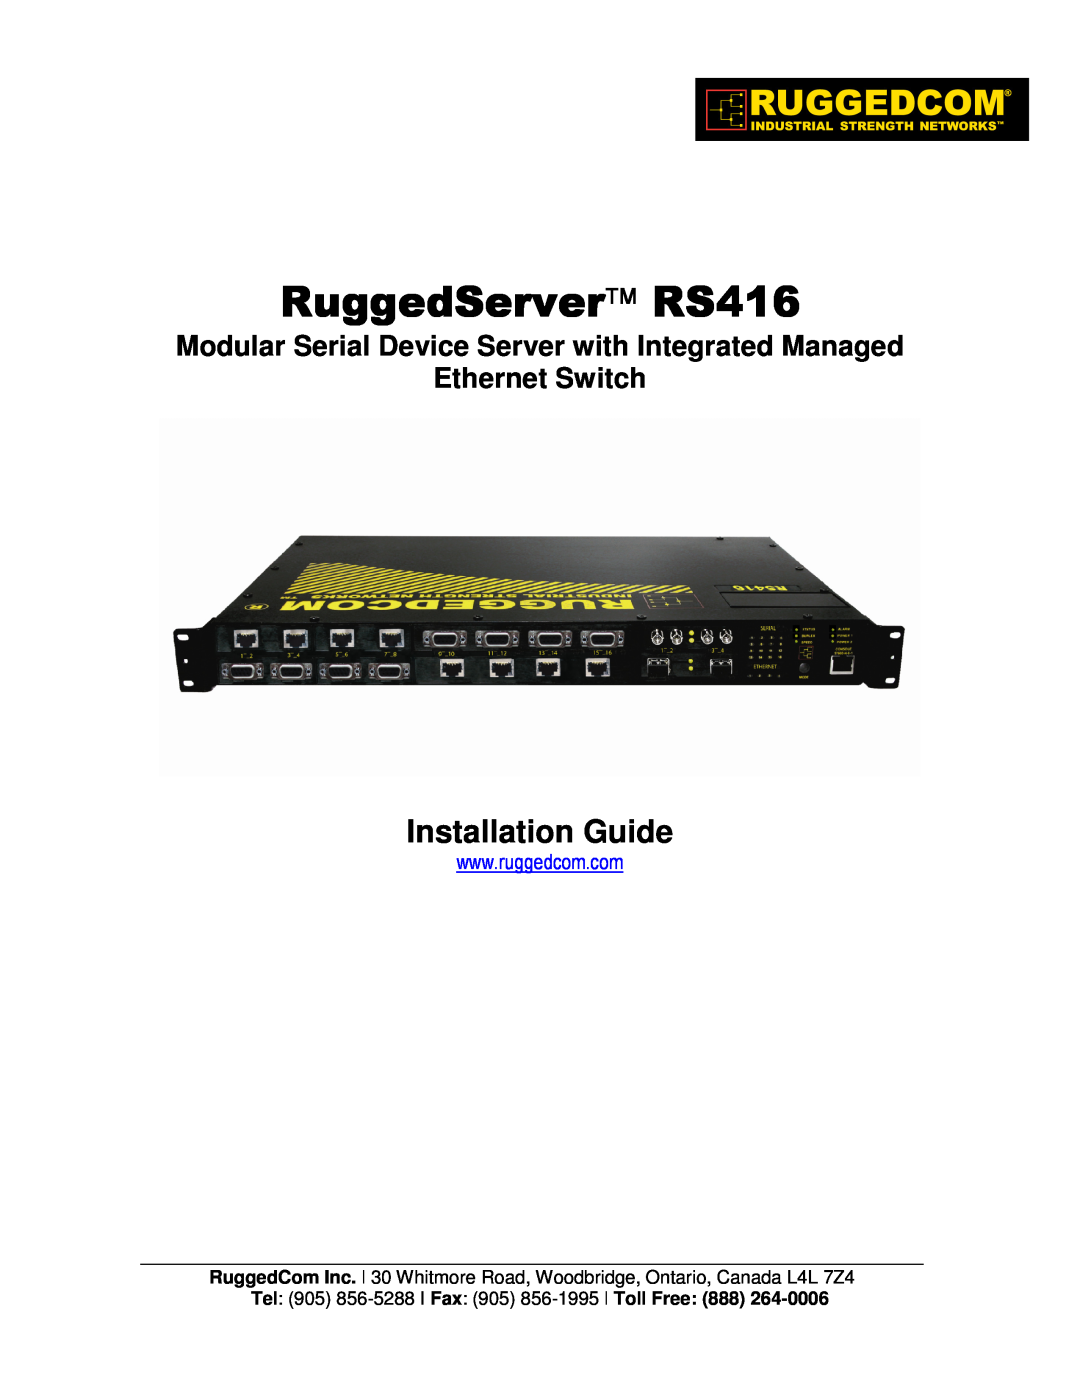 Rugged Outback manual Modular Serial Device Server with Integrated Managed Ethernet Switch, RuggedServer RS416 